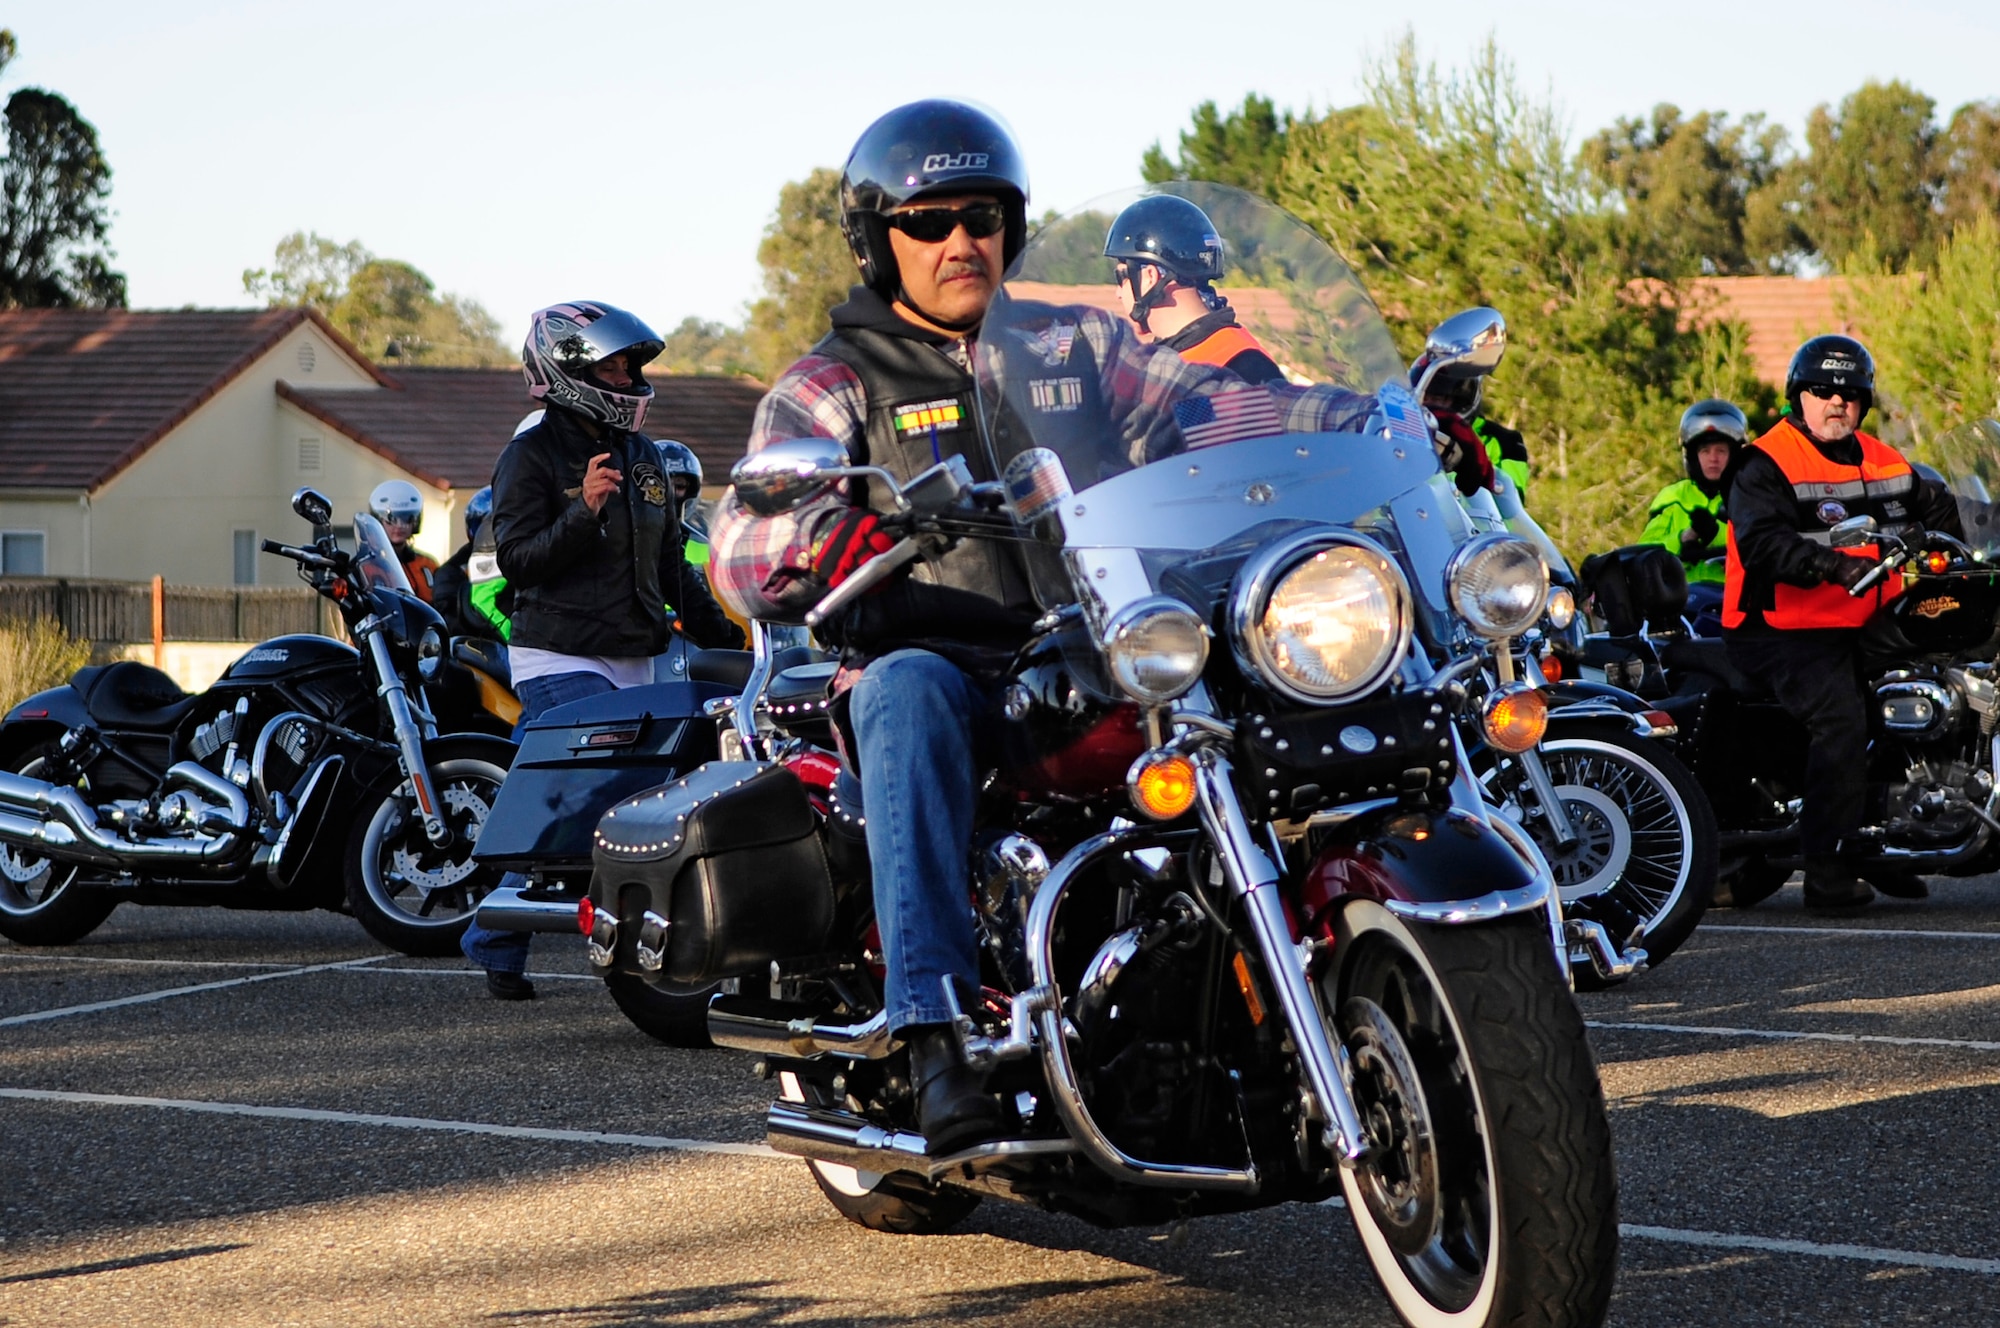 VANDENBERG AIR FORCE BASE, Calif. -- David Ybarra, a member of the Vandenberg chapter of the Green Knights, leads a group of bikers from Vandenberg to Hearst Castle here Saturday, April 21, 2012. Organized rides help familiarize bikers with how to ride safely in a group. (U.S. Air Force photo/Michael Peterson)